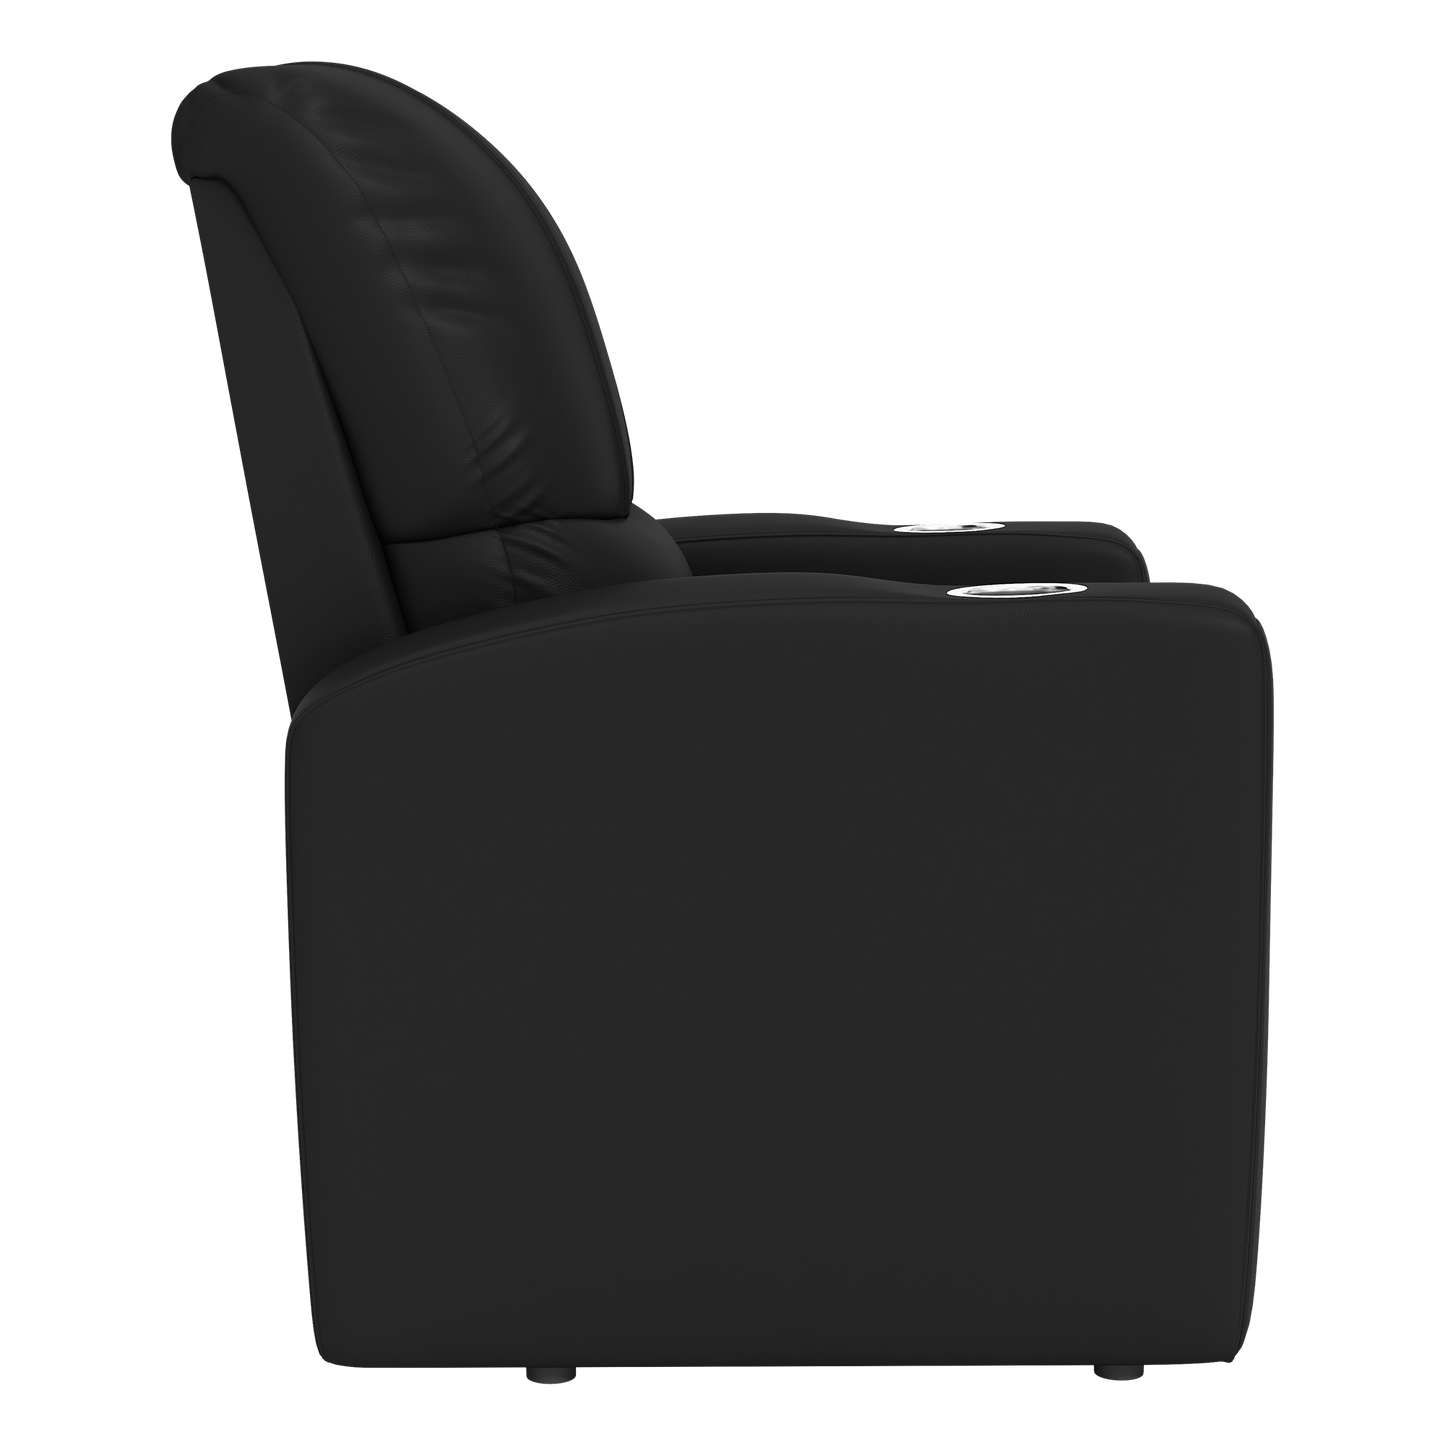 Stealth Recliner with GMC Primary Logo